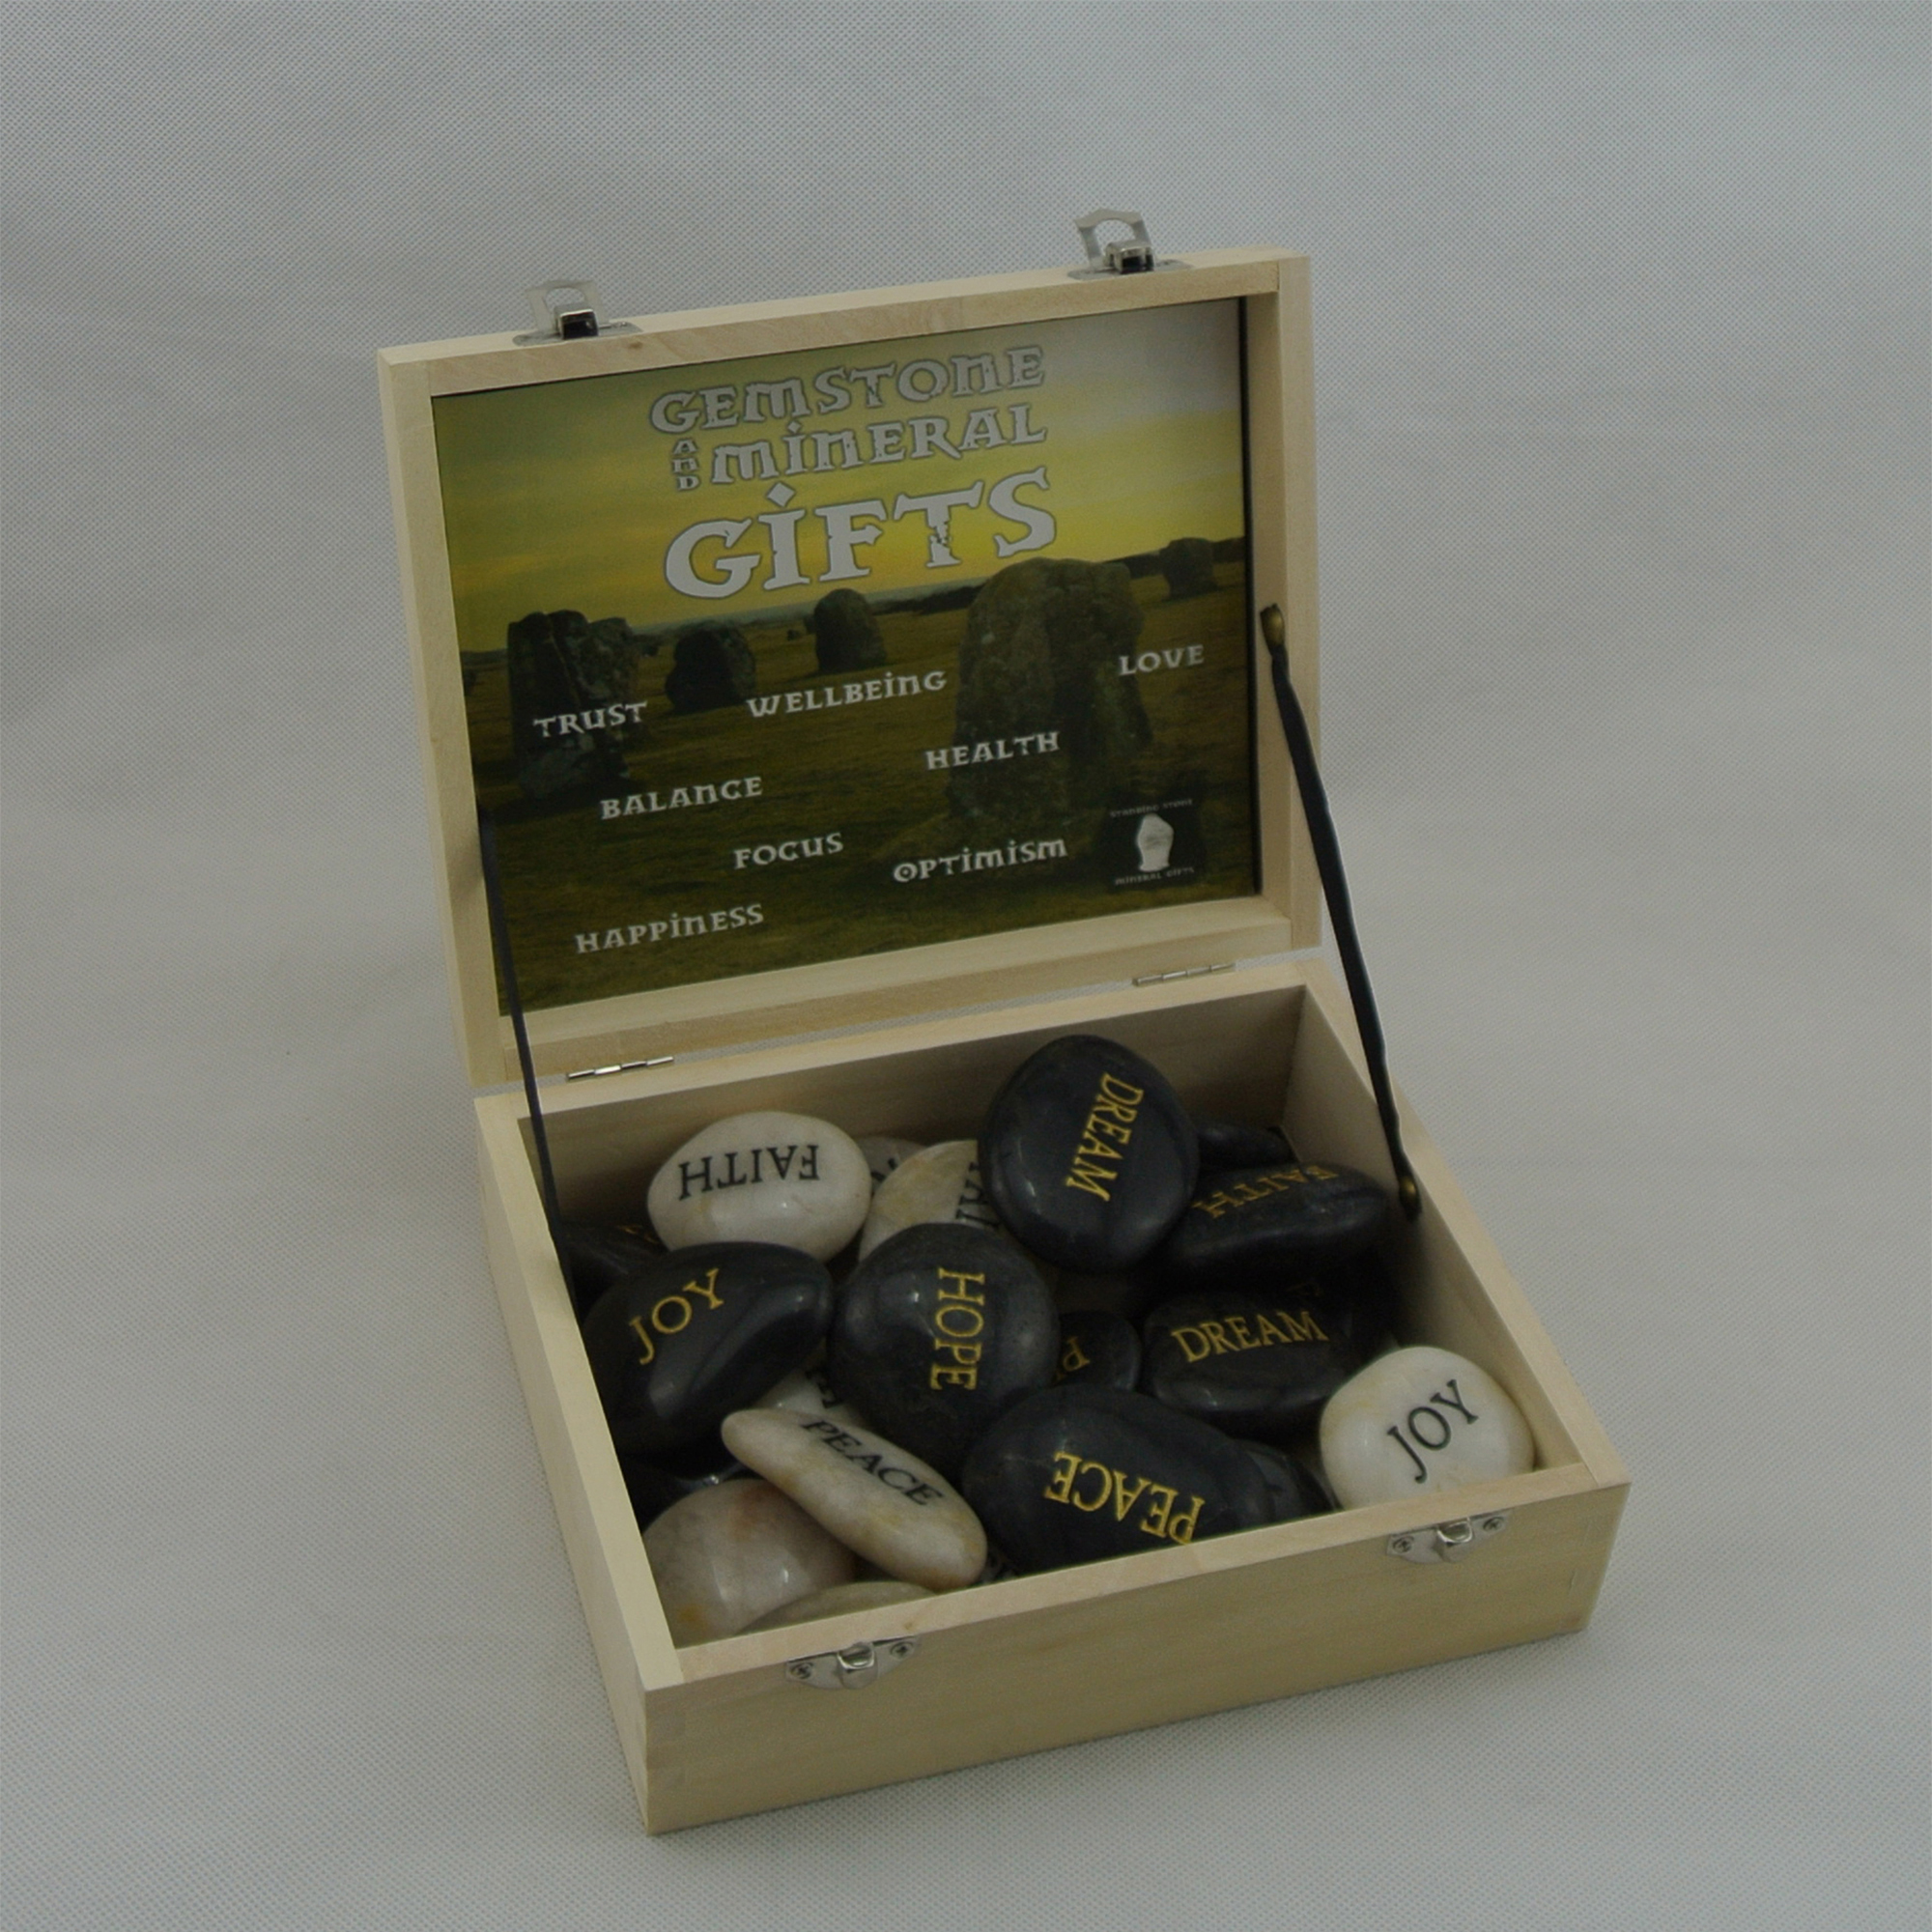 Pebble stone natural pebble with customize engravment in wooden display box